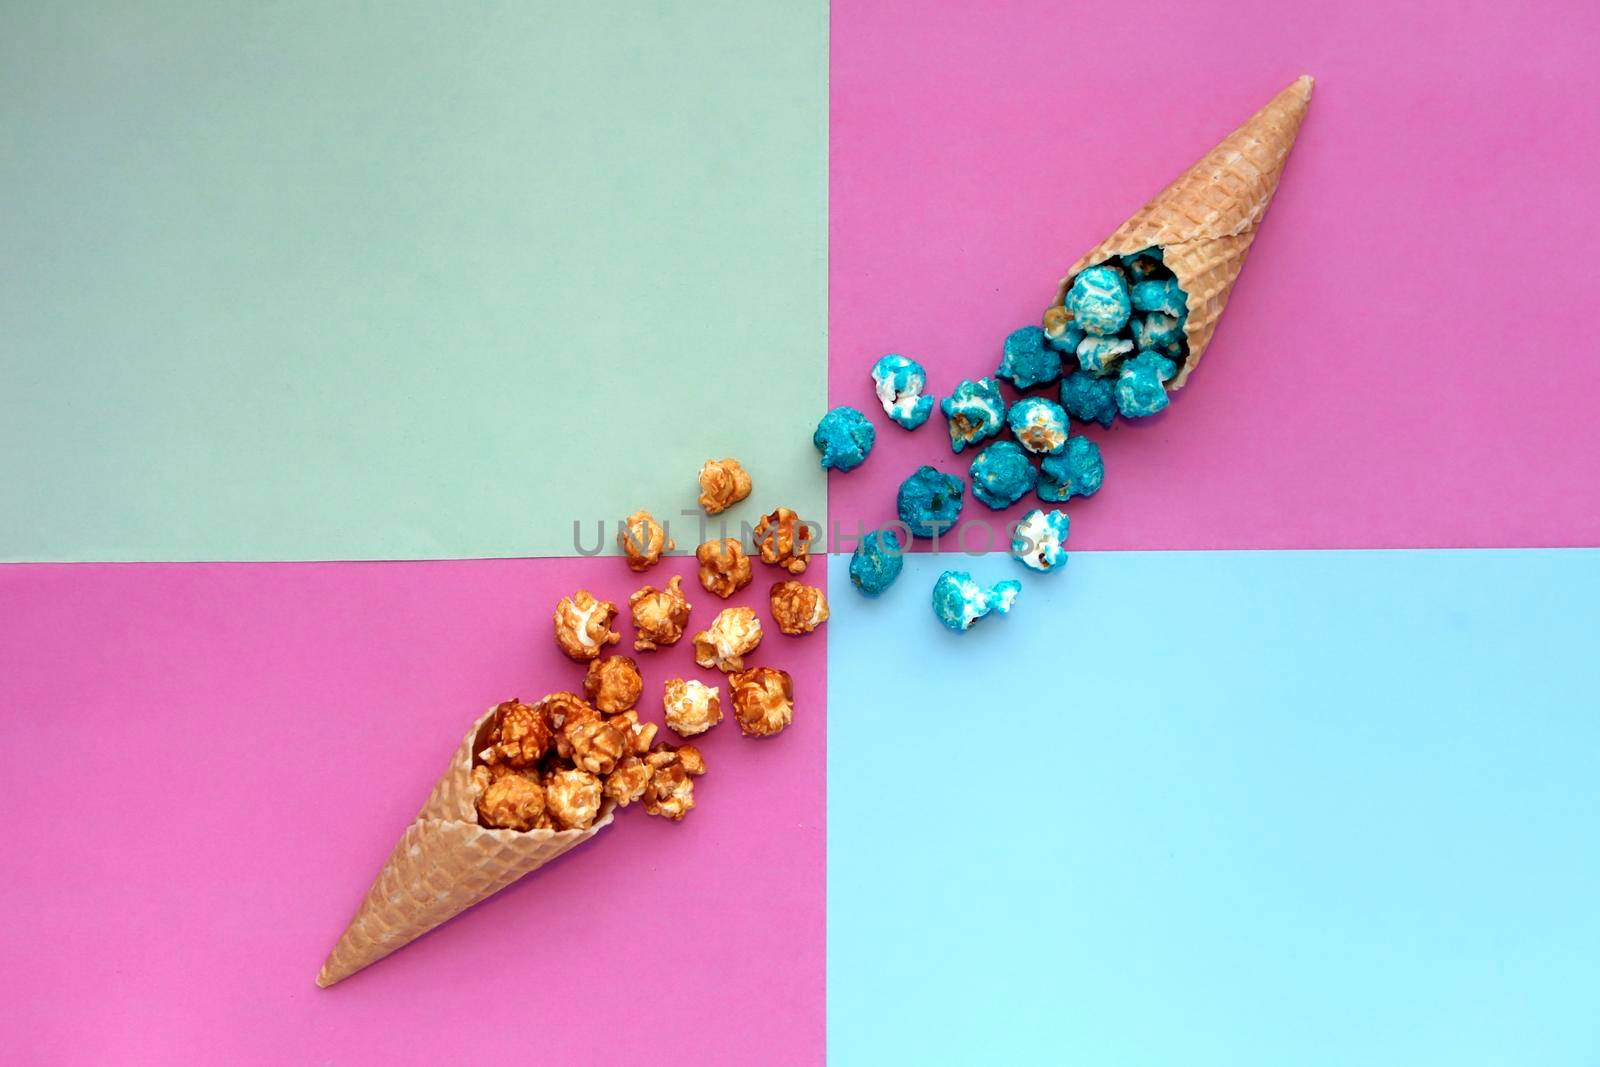 Popcorn spill out from waffle ice cream cone on pastel colorful background. Blue and caramel Popcorn on a cone cornucopia Top view bright hipster background. Fast food. by julija